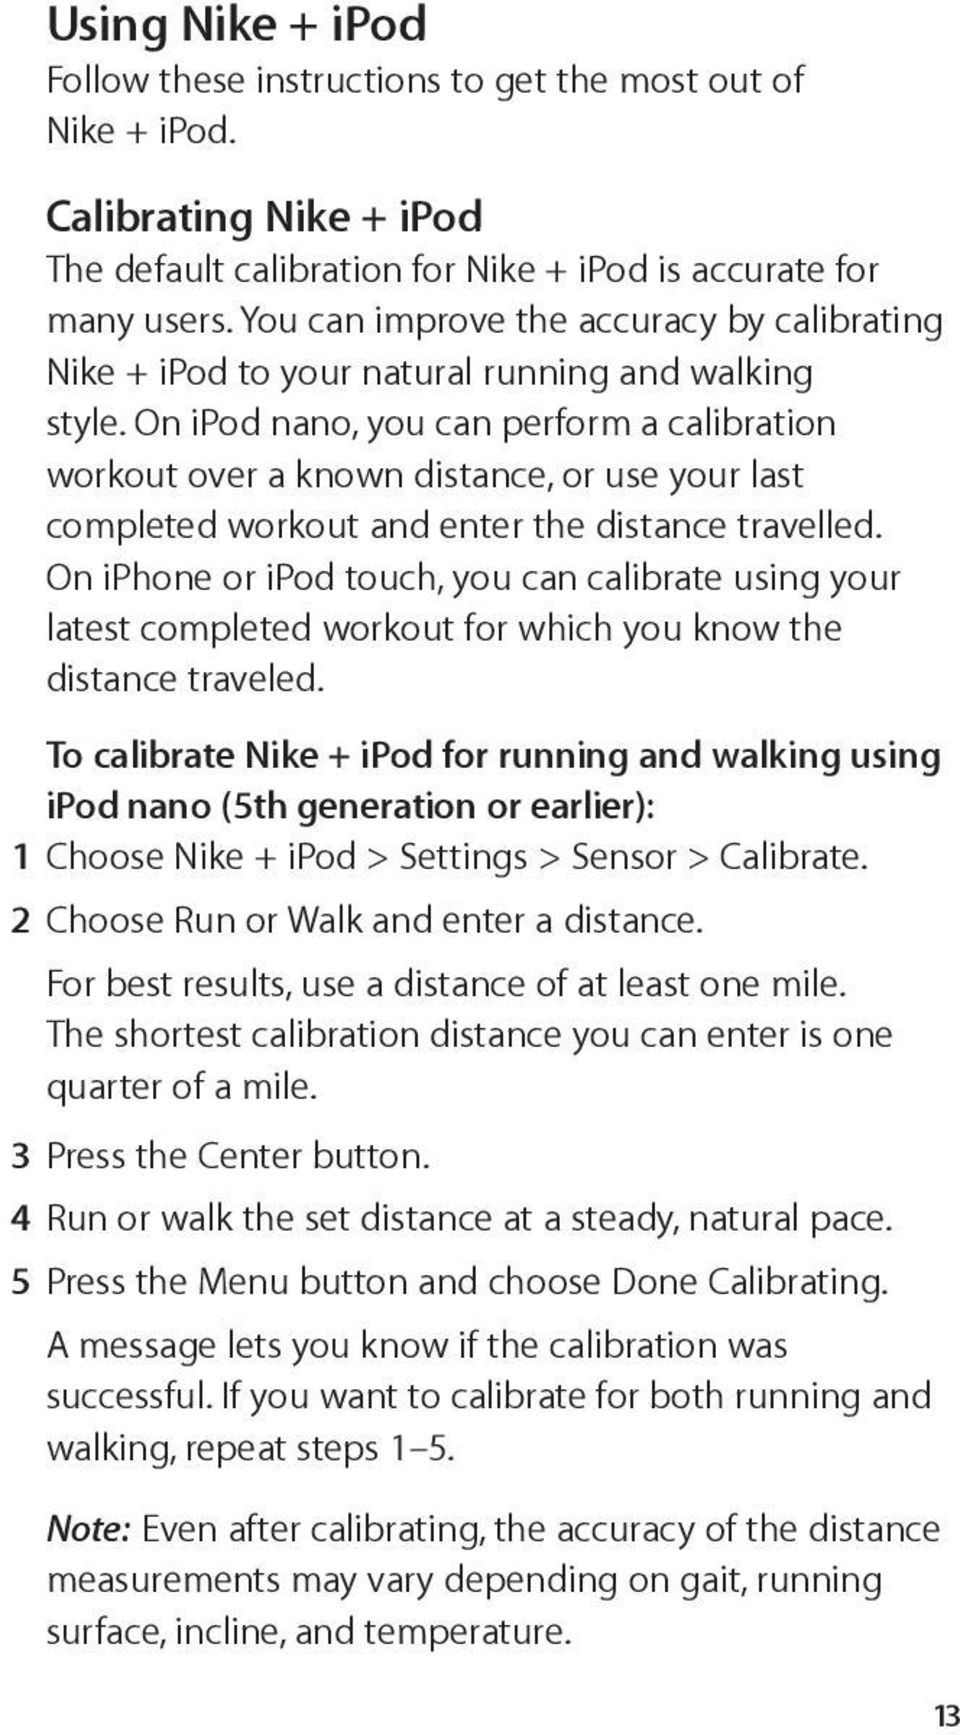 On ipod nano, you can perform a calibration workout over a known distance, or use your last completed workout and enter the distance travelled.